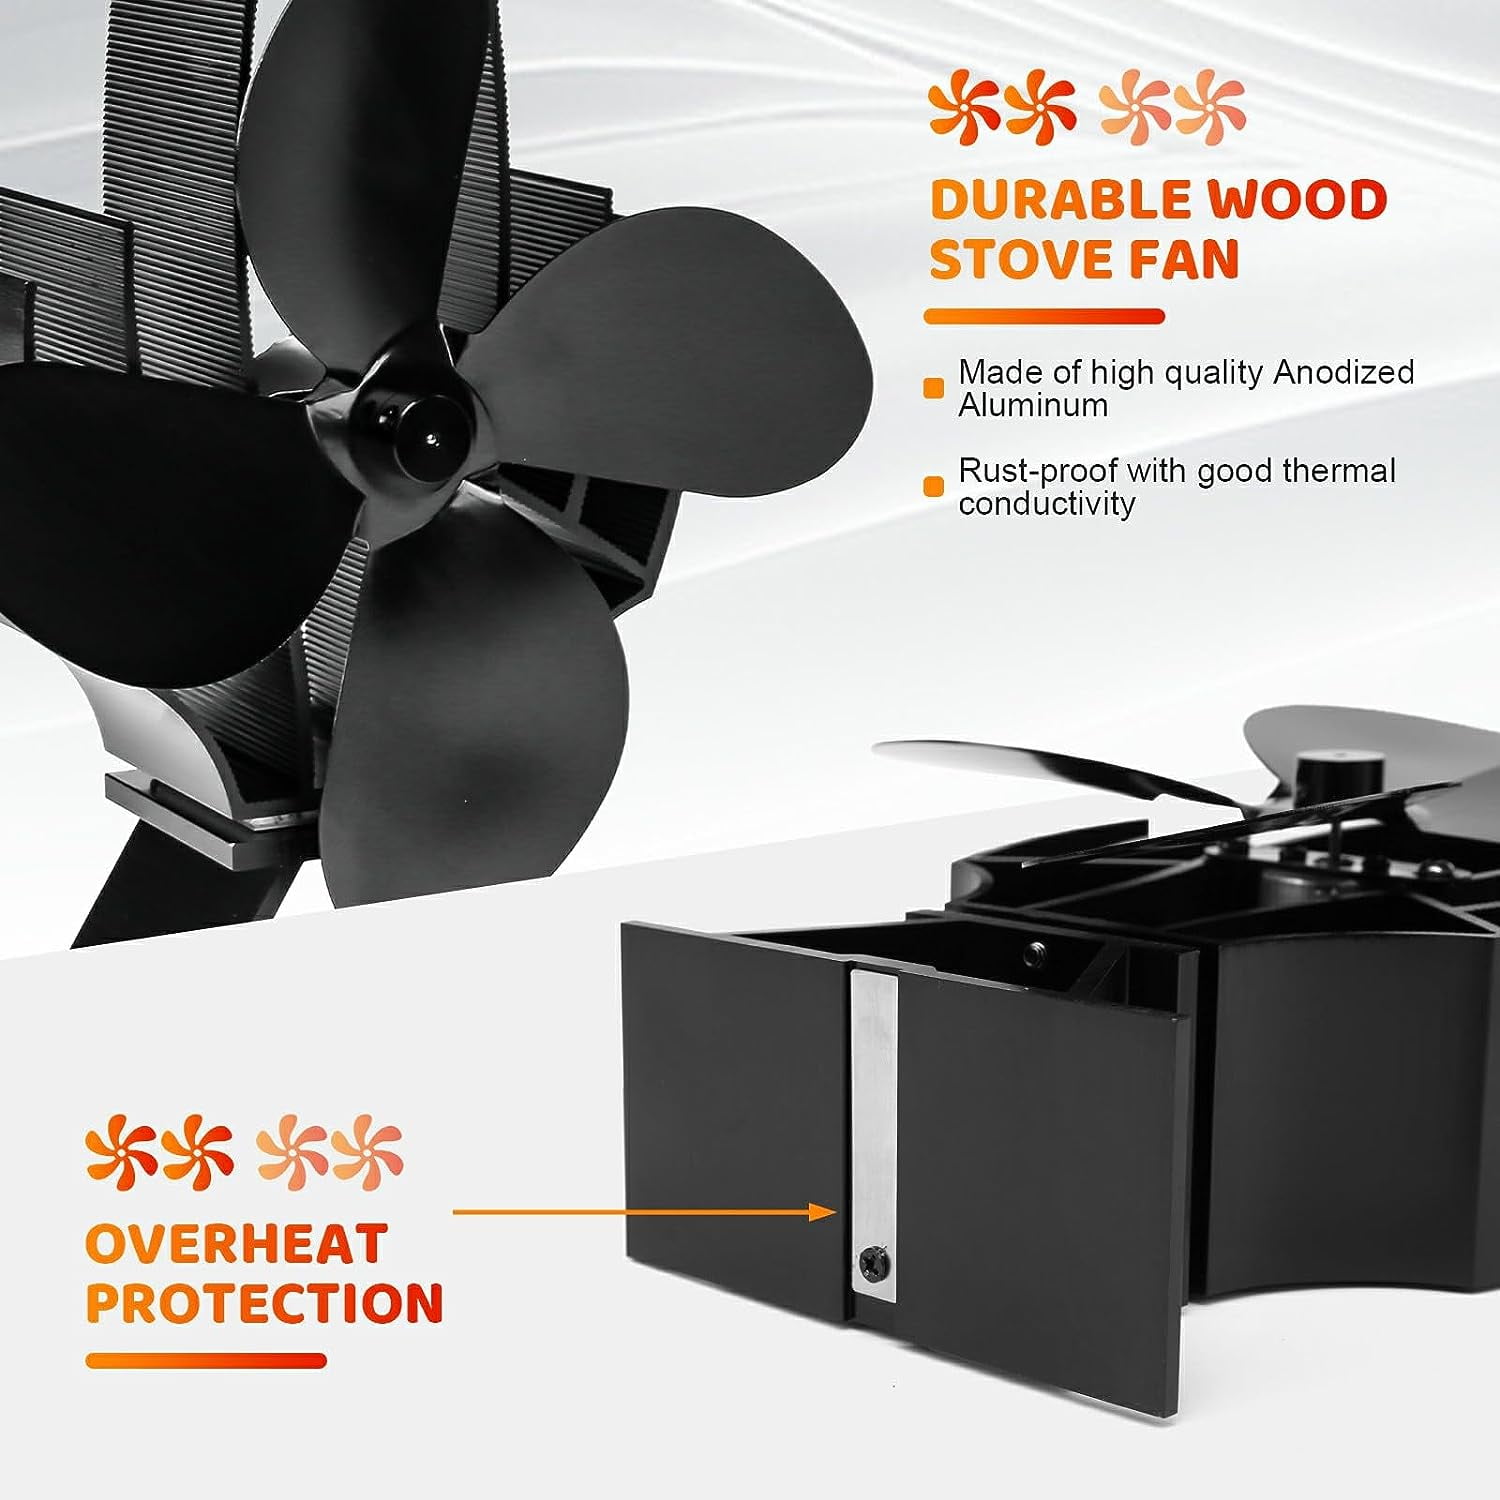 Hanaoyo Wood Stove Fan for Buddy Heater, Heat Powered Stove Fan Slot Lock Design with Bracket for Heaters, Thermal Fireplace Fan Non Electric for